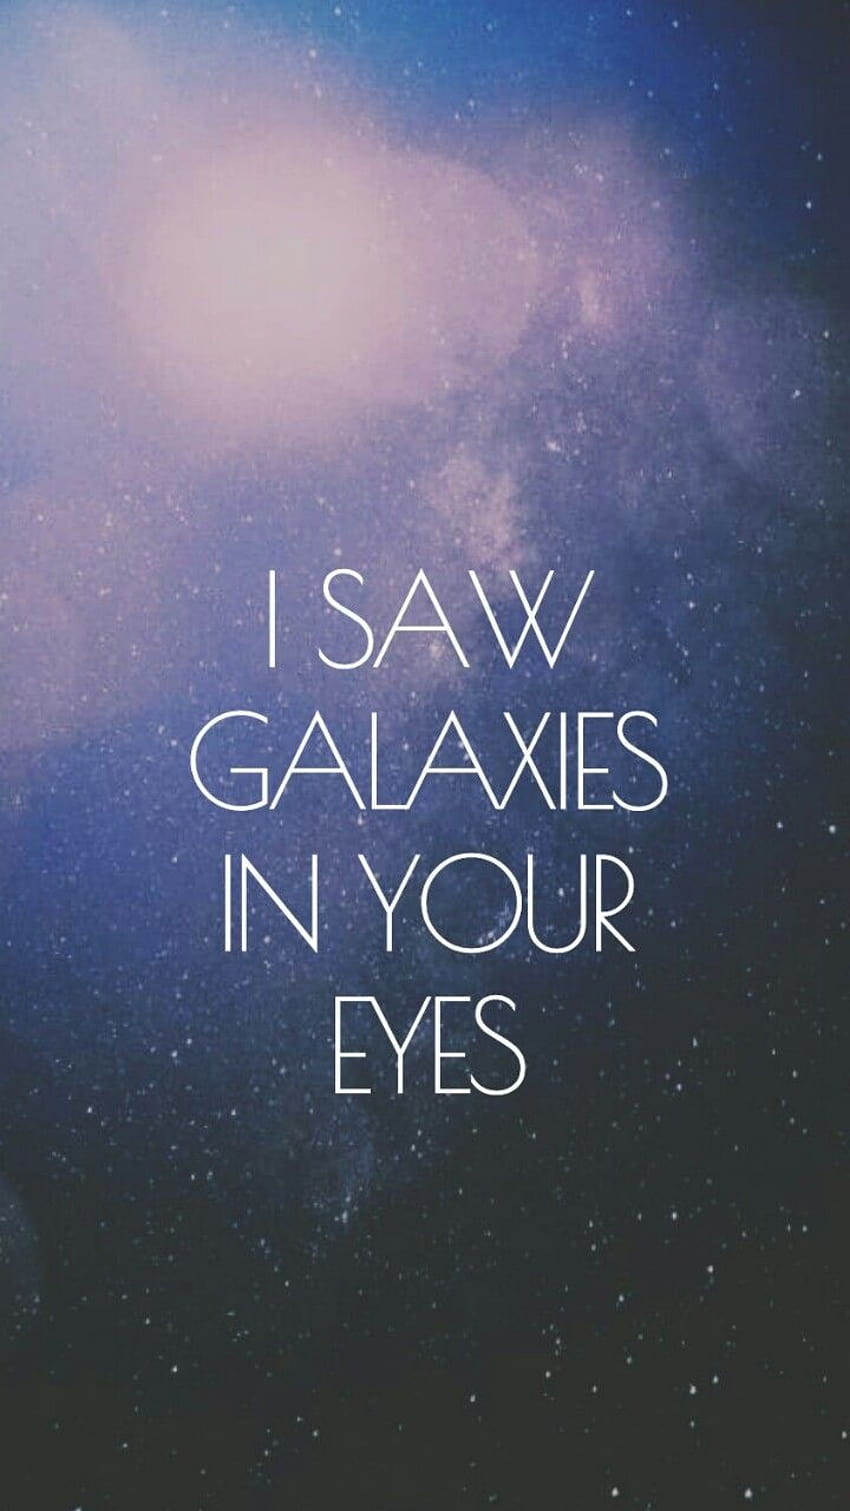 quote quotes sky stars love quotes backgrounds galaxies backgrounds phone quoteoftheday lock screen lockscreen phone sky full of stars lock screens lockscreens phone lockscreen phone lockscreens bestlockscreens •, love notes HD phone wallpaper